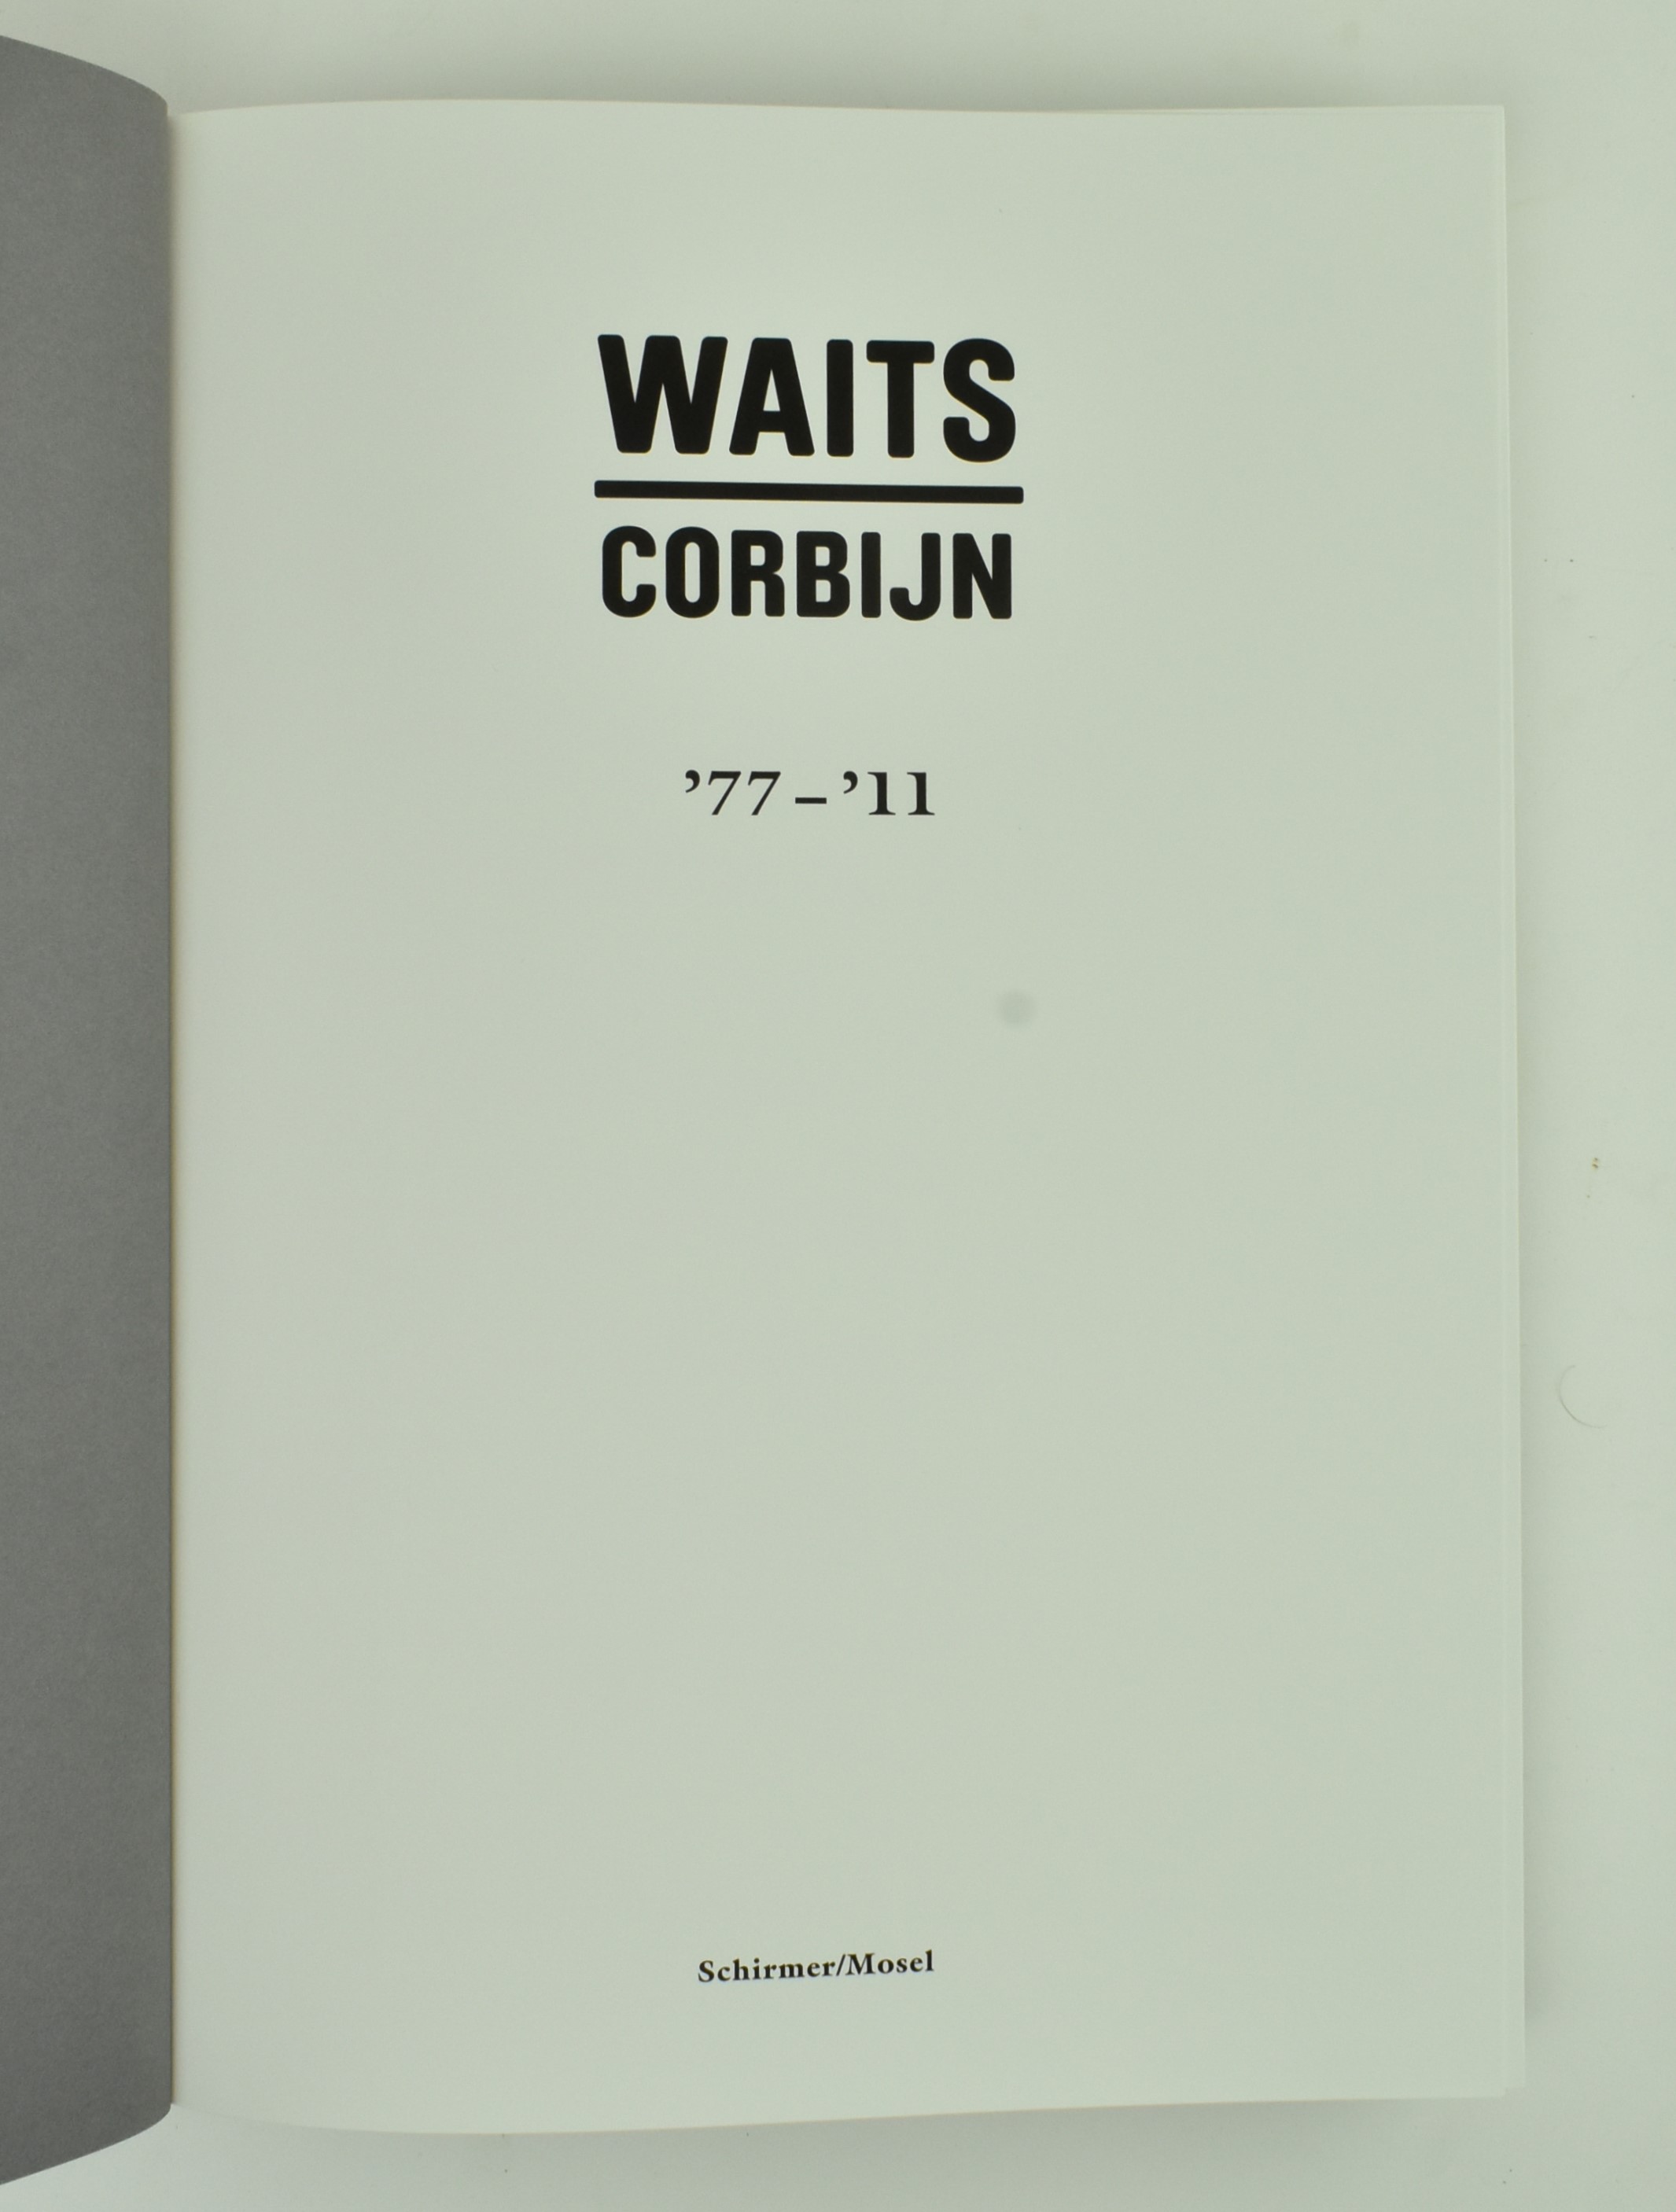 WAITS BY CORBIJN. LIMITED EDITION ON TOM WAITS IN SLIPCASE - Image 4 of 7